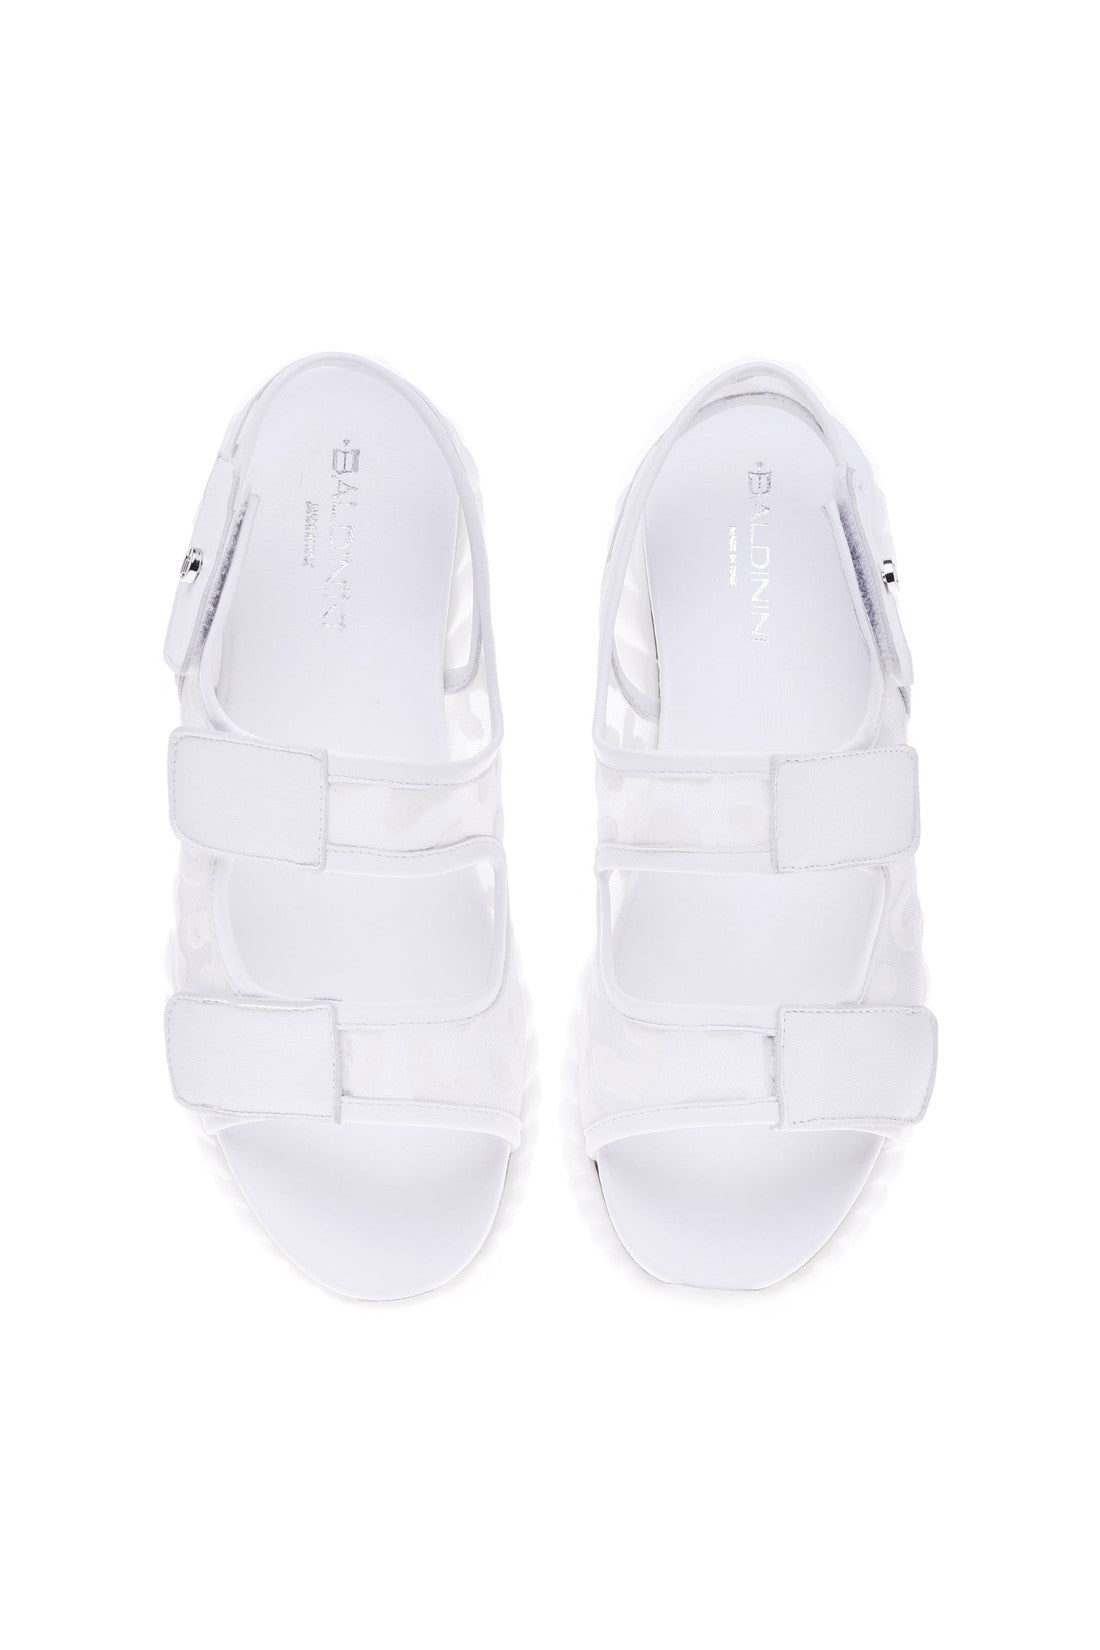 Sandal in white nappa leather and lace